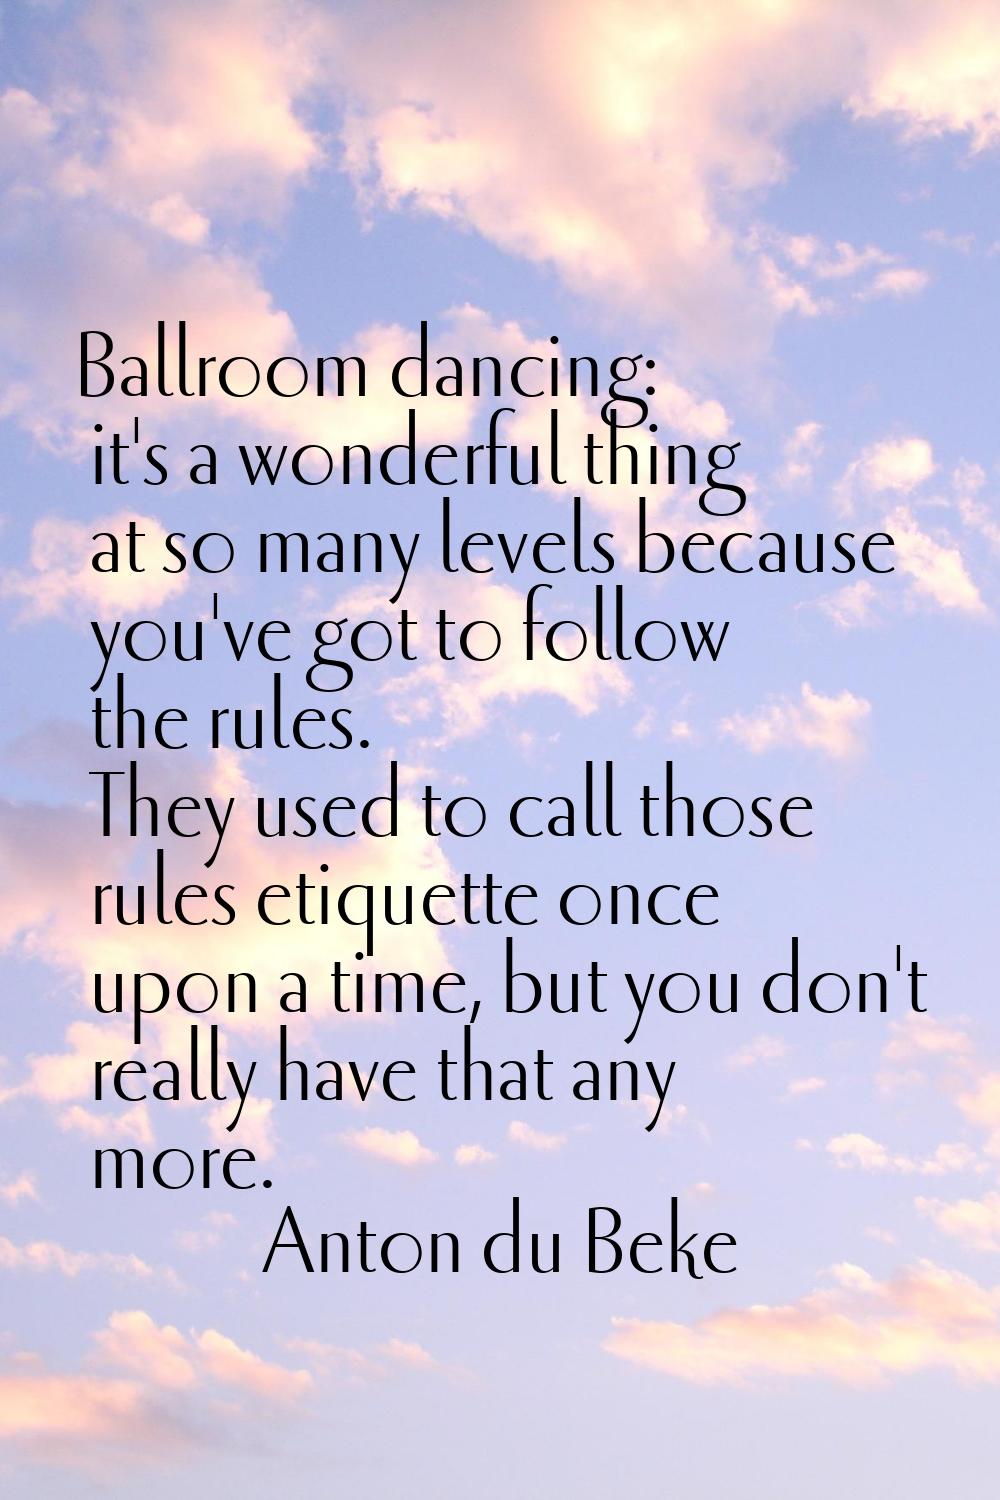 Ballroom dancing: it's a wonderful thing at so many levels because you've got to follow the rules. 